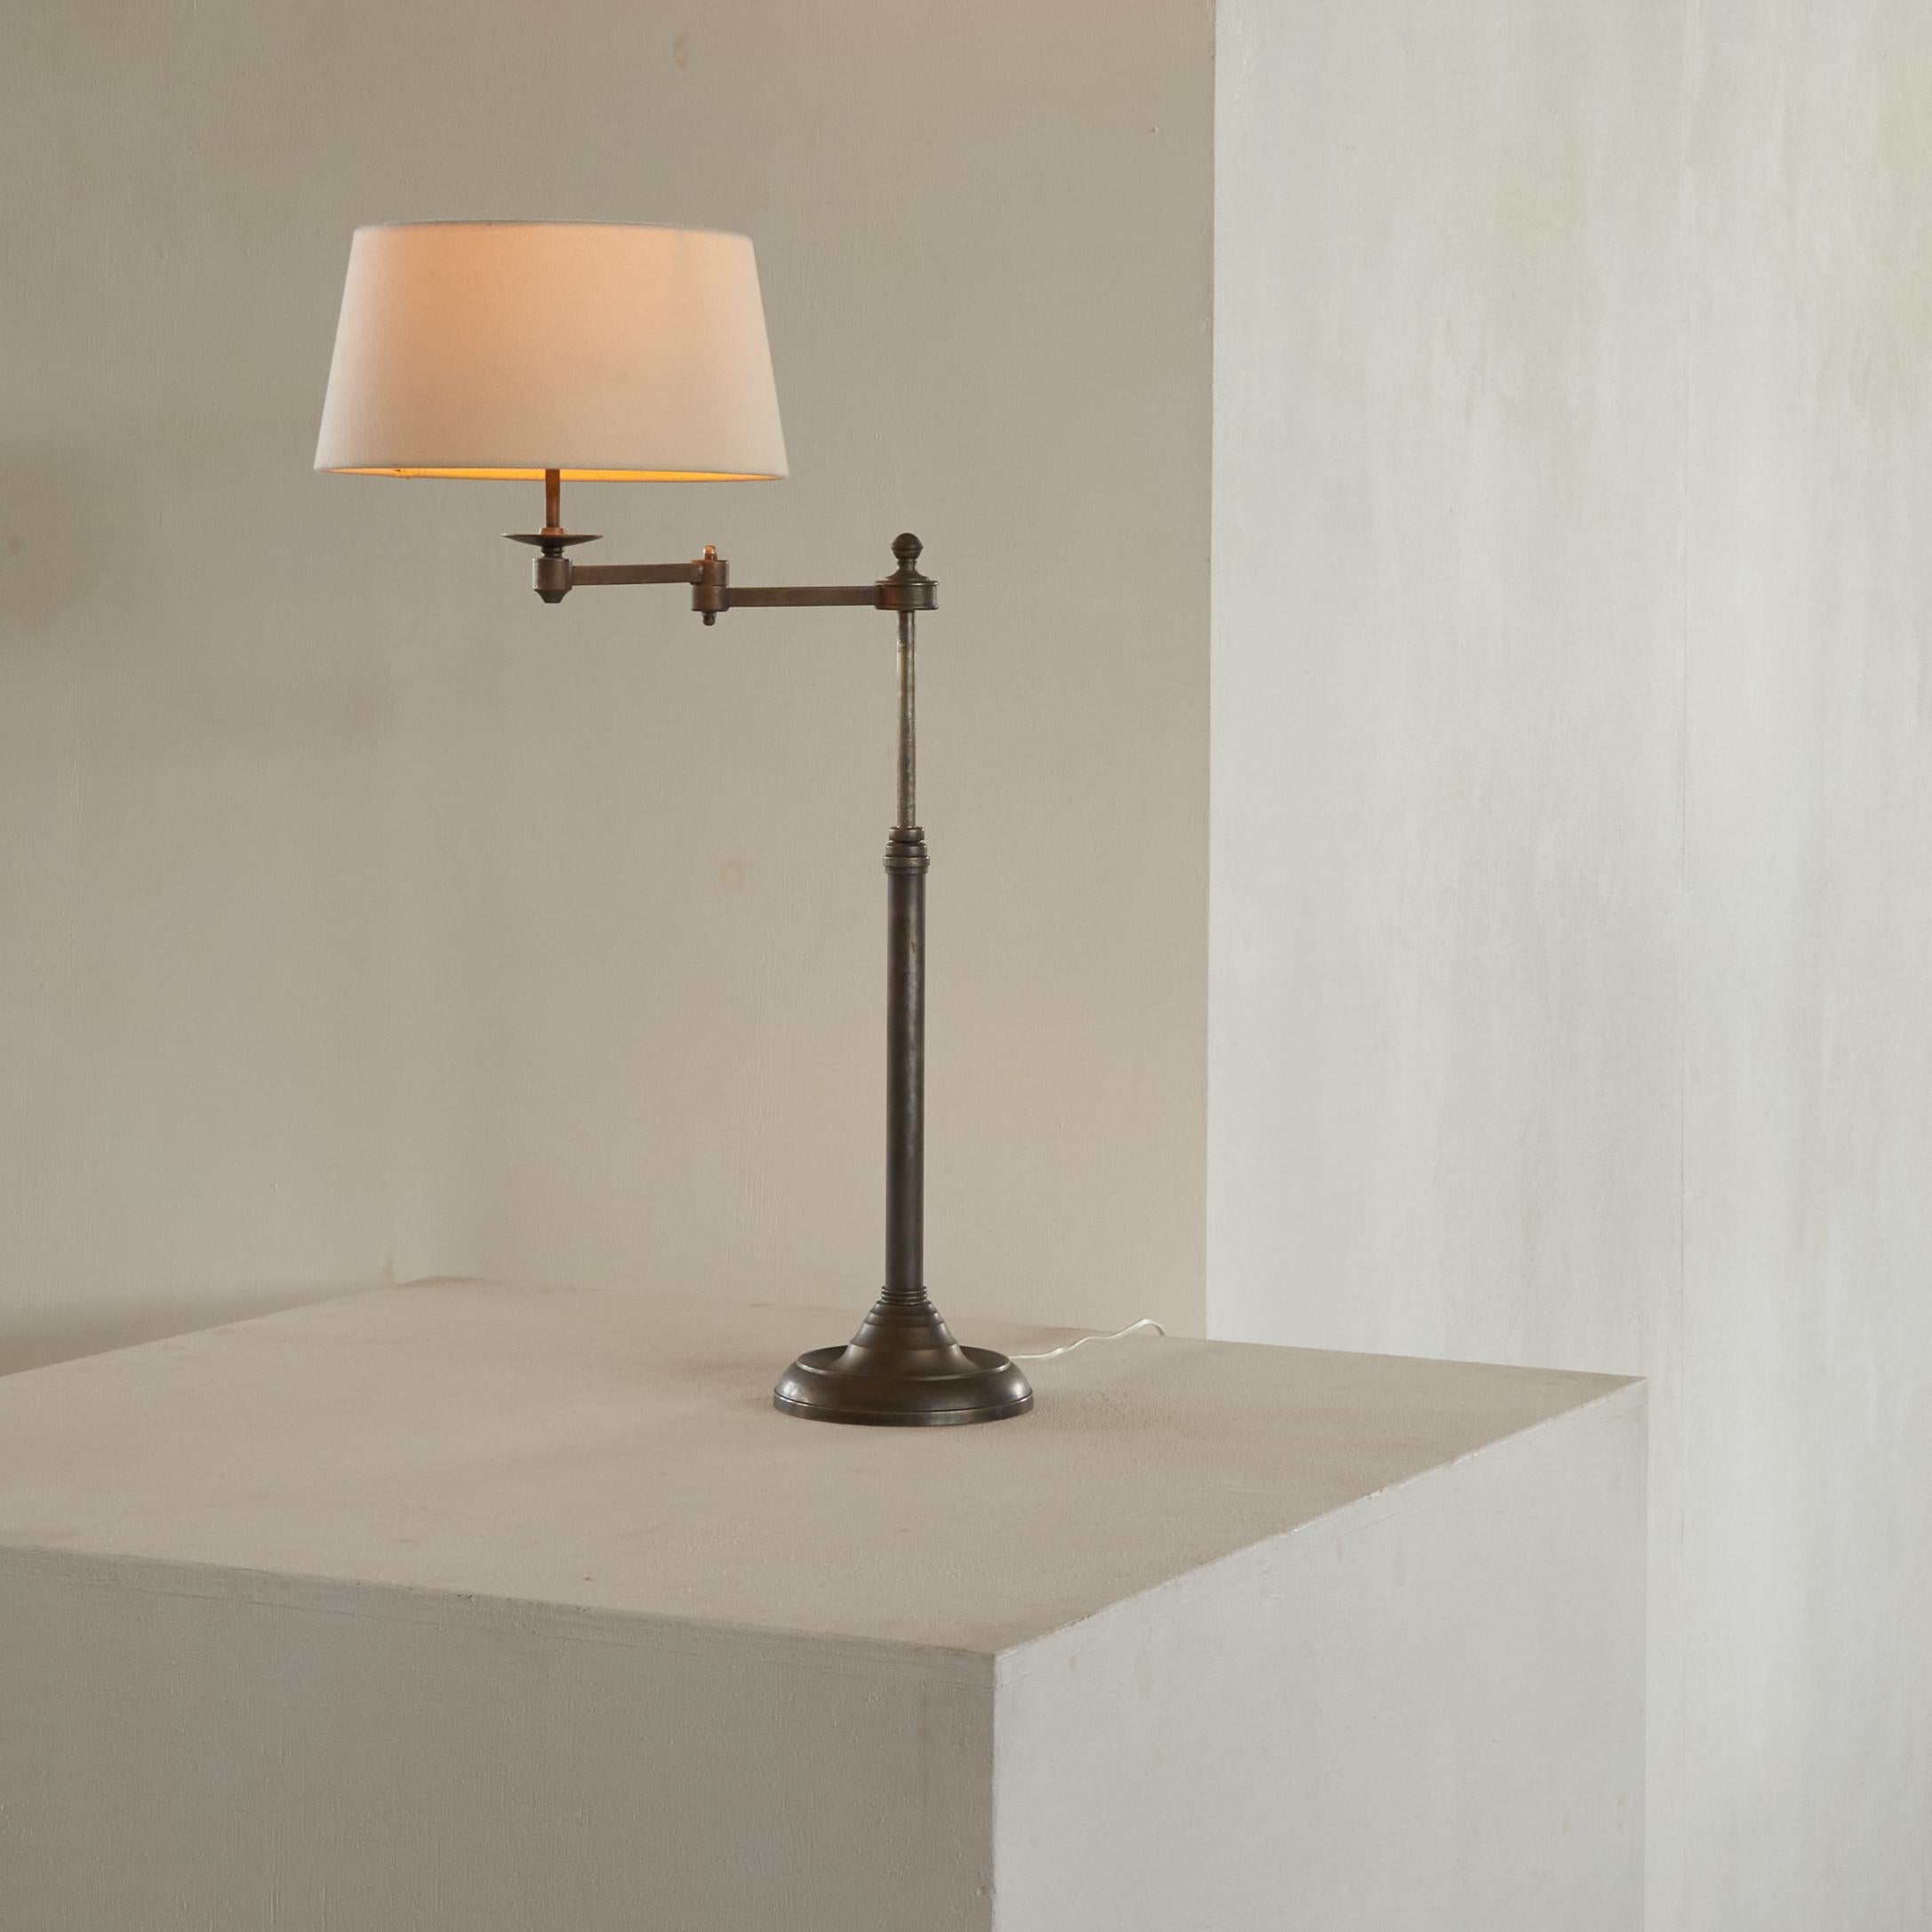 Italian Articulating Swivel Table Lamp in Metal 1970s.

Beautiful and large articulating table lamp with beautiful details in metal, made somewhere in the 1970s. Classic and timeless design with touches of both classical and modernist nature.